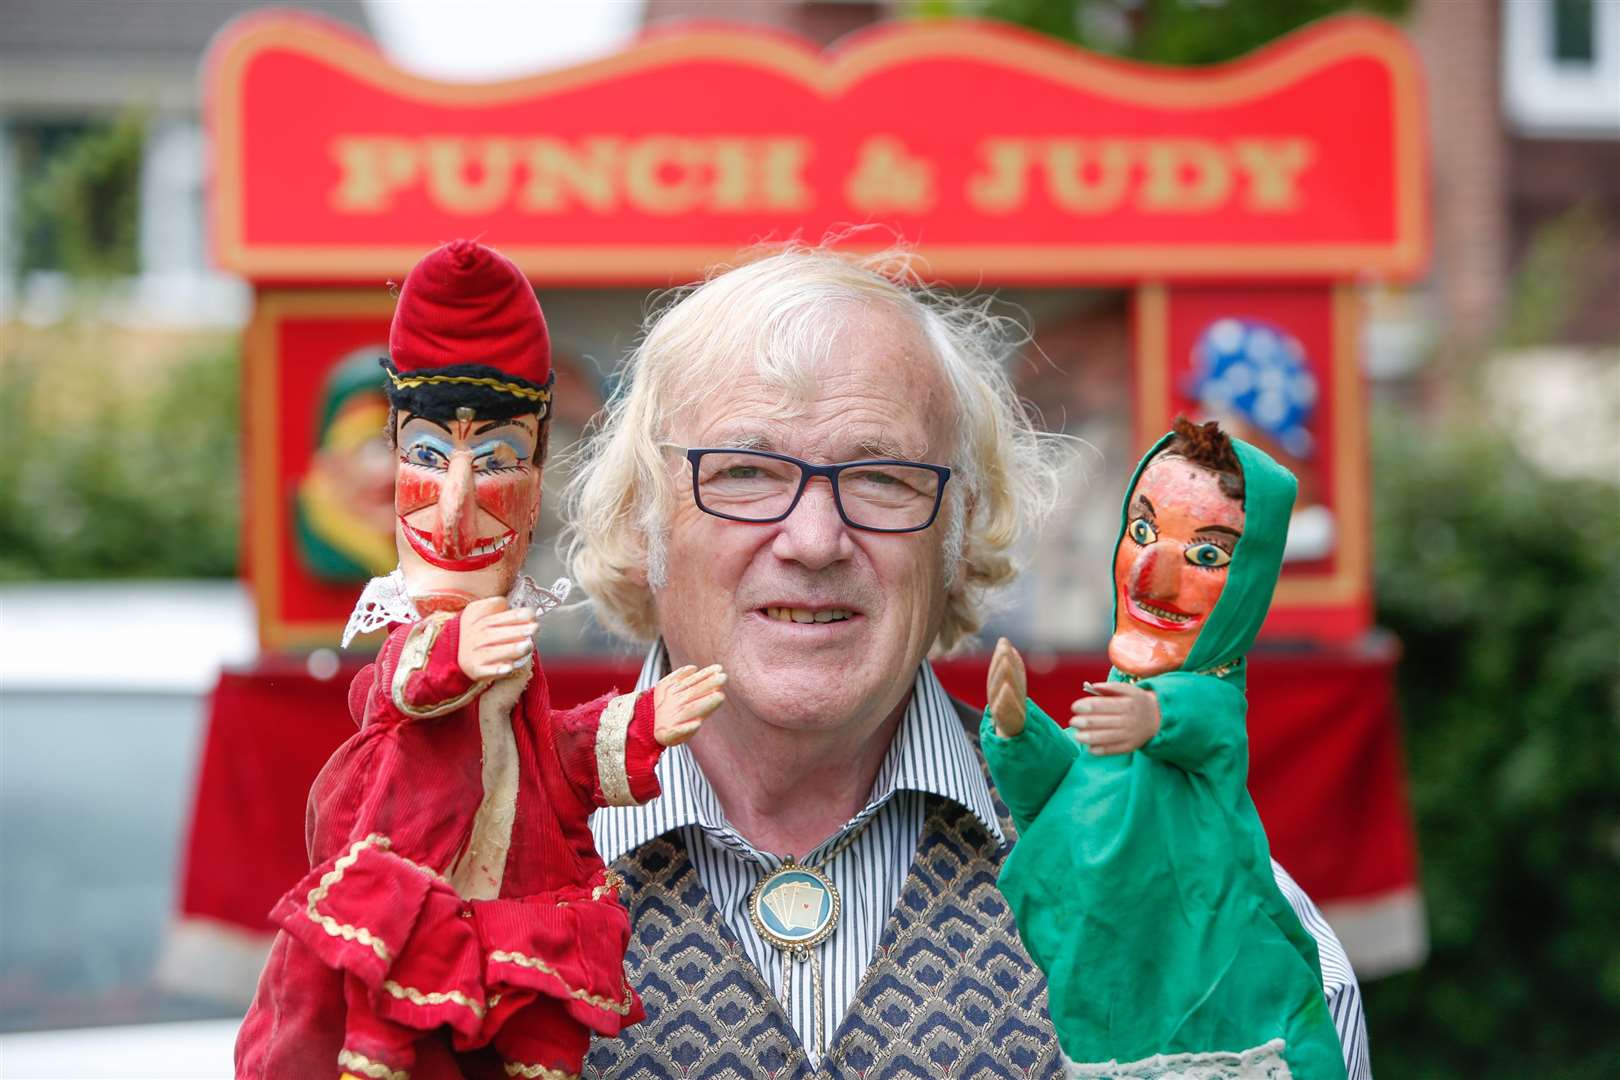 Swale Punch and Judy man Myles 'Mr Mystery' Phillips often puts on shows at The Leas at Minster. Could there be more?